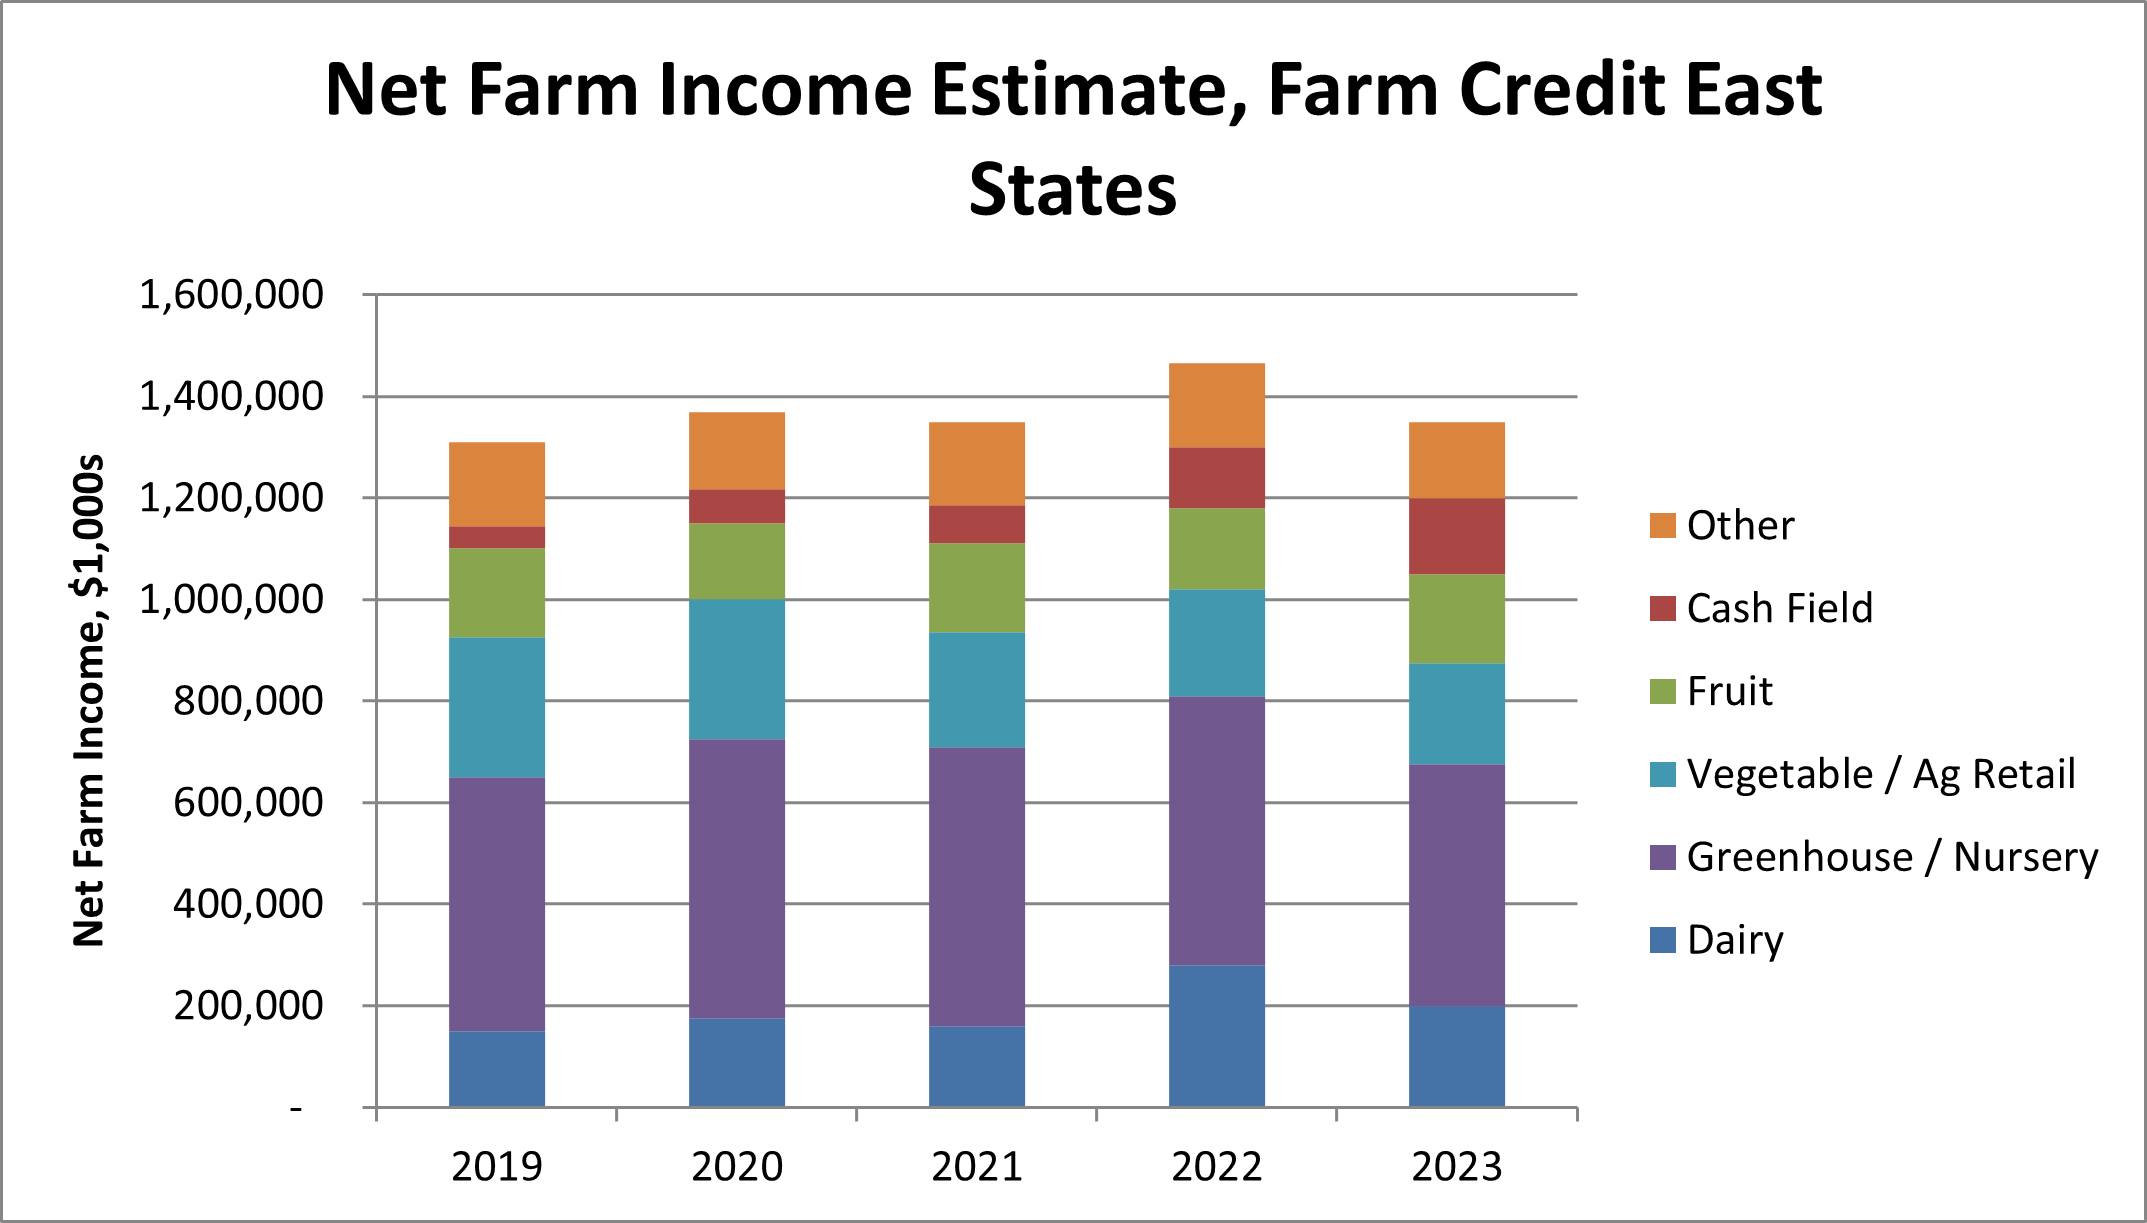 Q2 2023 Bar graph of Net Farm Income Projections from 2019 to 2023 